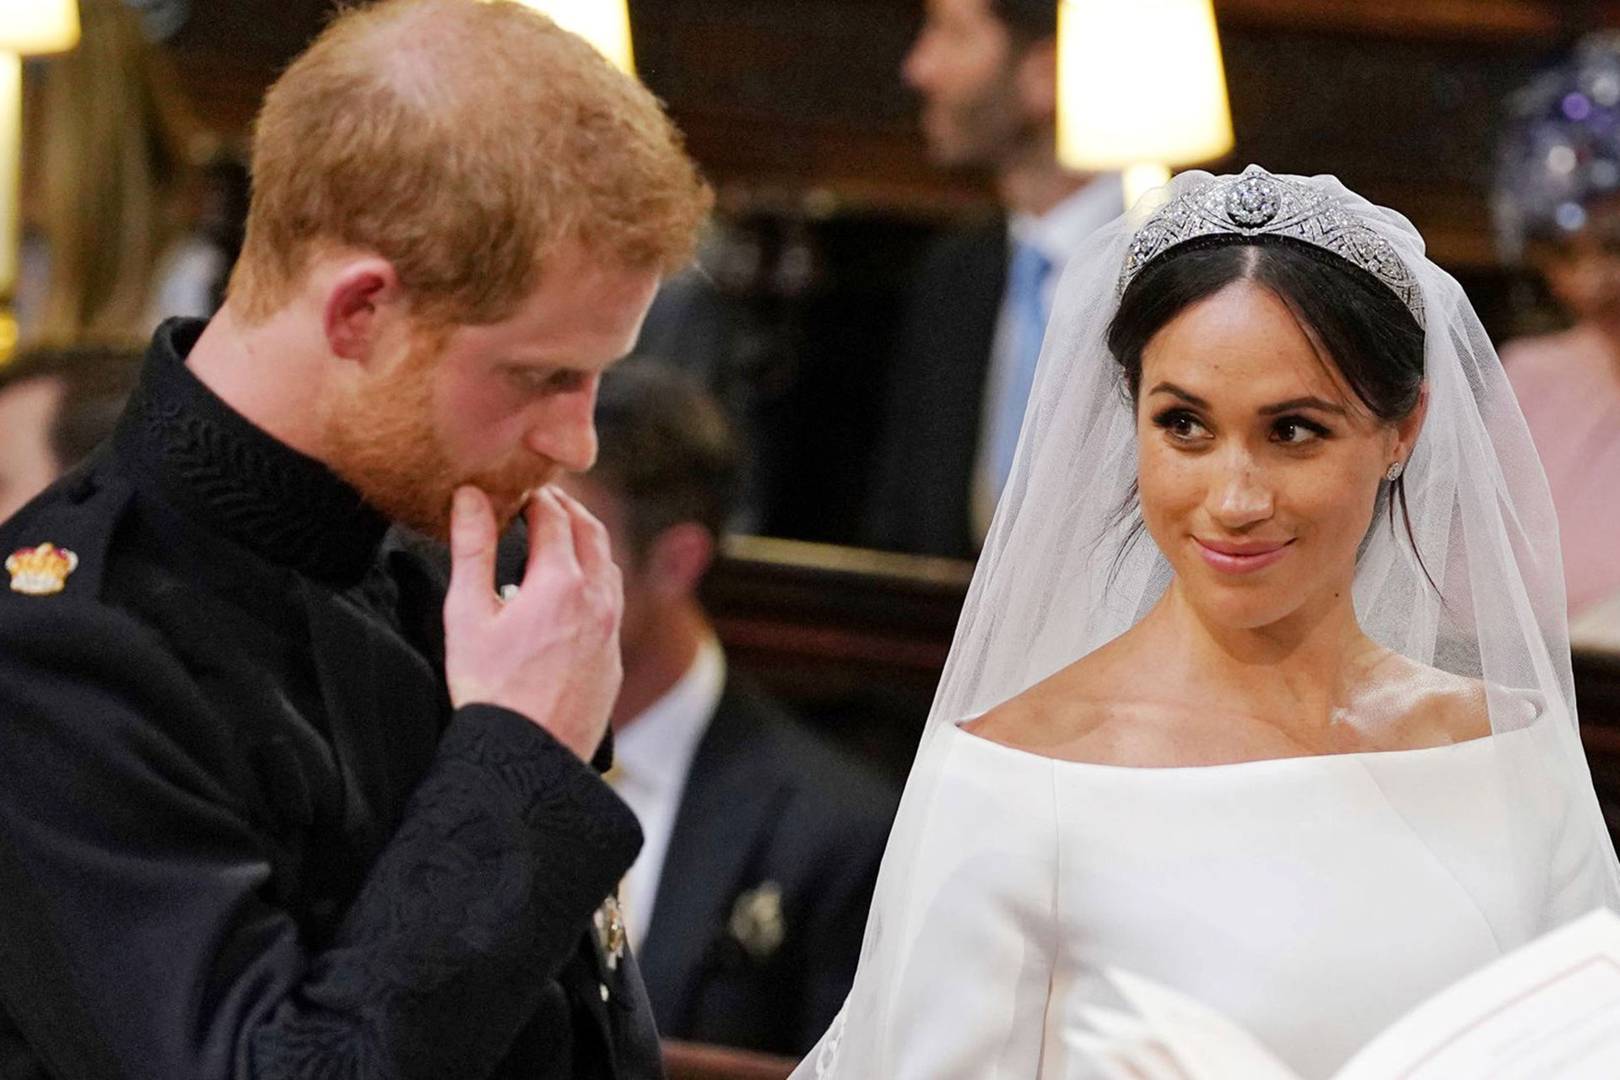 Harry and Meghan during their wedding ceremony